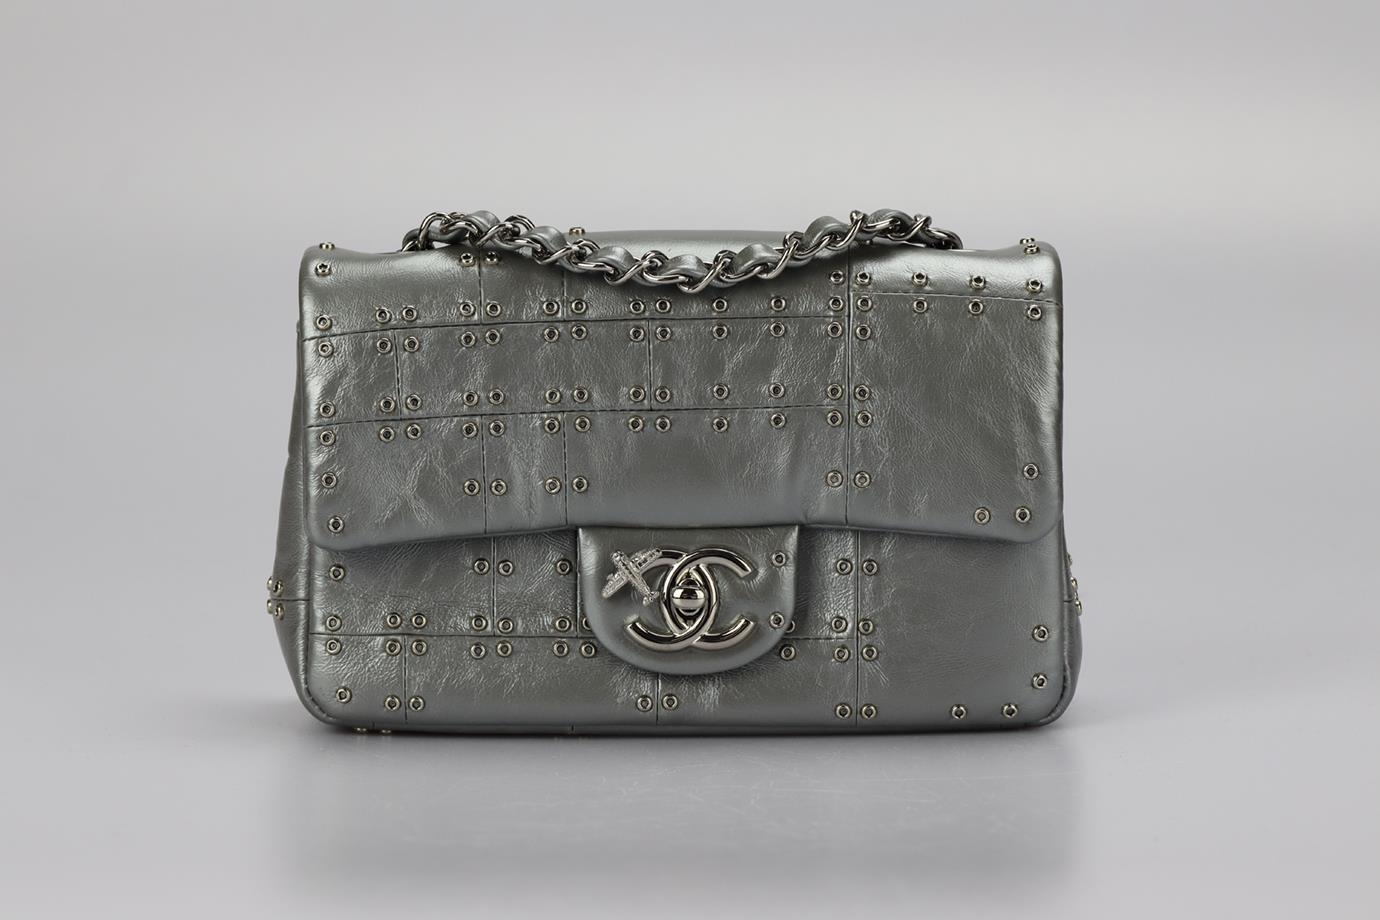 Chanel 2016 Classic Mini Rectangle Flap Embellised Leather Shoulder Bag. Silver. Twist lock fastening - Front. Comes with - authenticity card. Does not come with - dustbag or box. Height: 4.8 in. Width: 7.6 in. Depth: 2.5 in. Strap drop: 21.2 in.